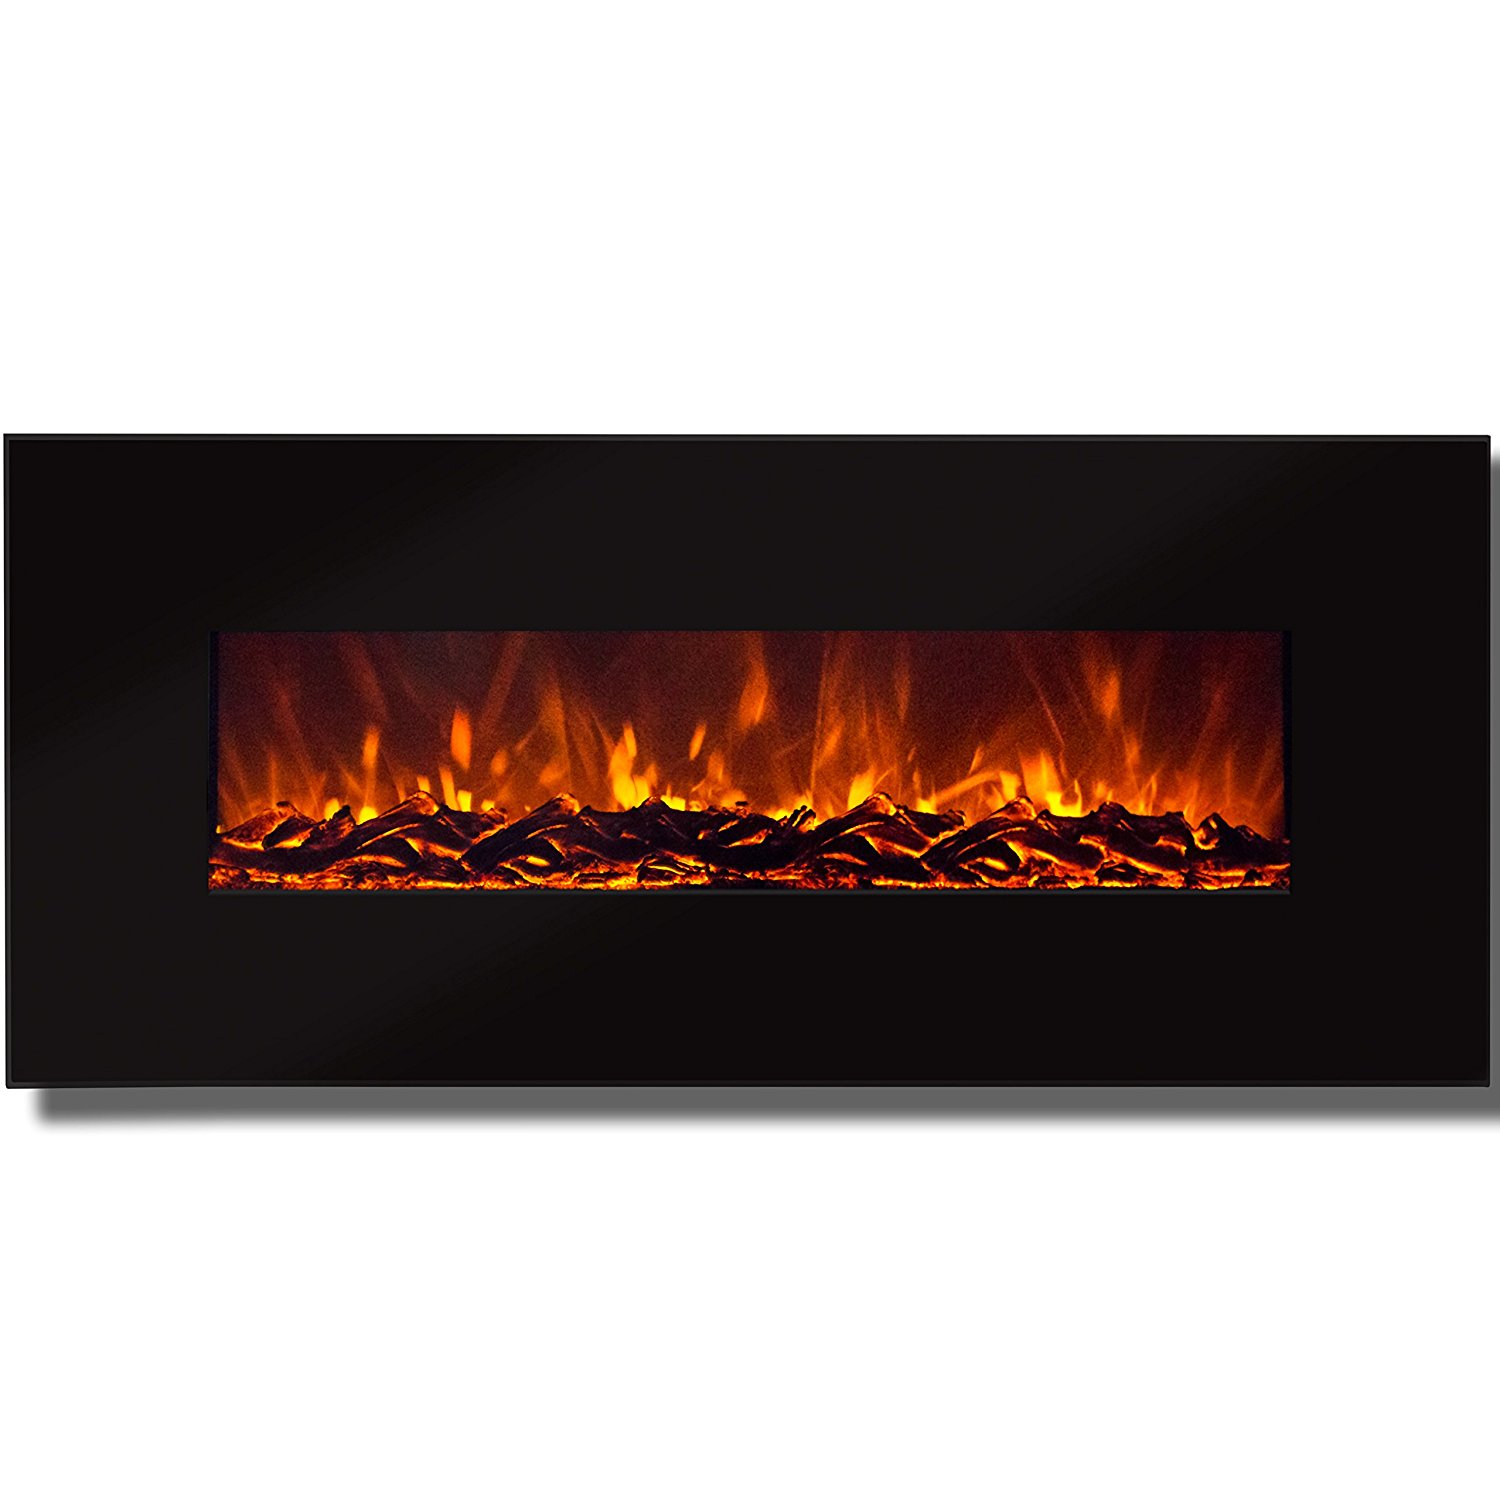 Best Choice Products 50" Electric Wall Mounted Fireplace Heater Smokeless Ventless Adjustable Heat